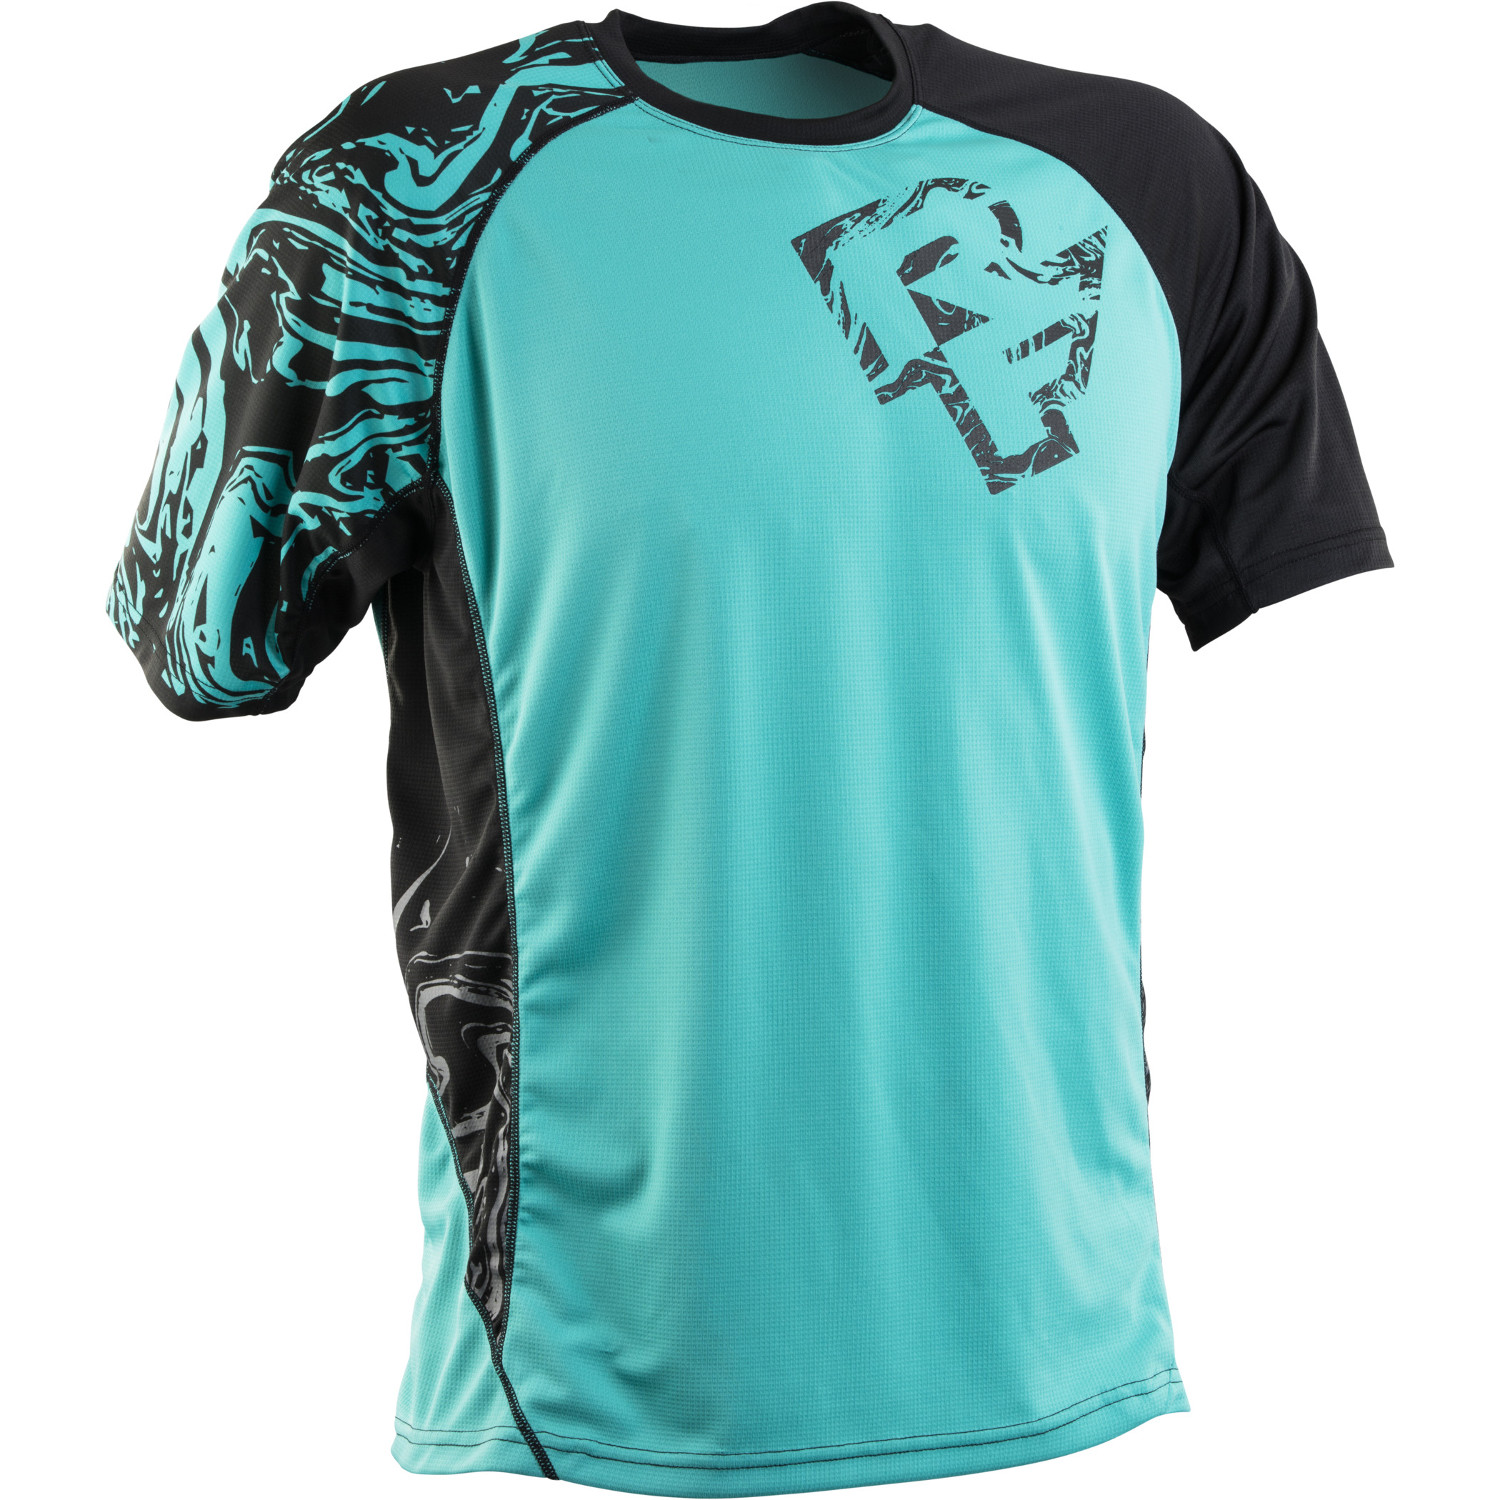 Race Face Bike Short Sleeve Jersey Indy Turquoise/Black